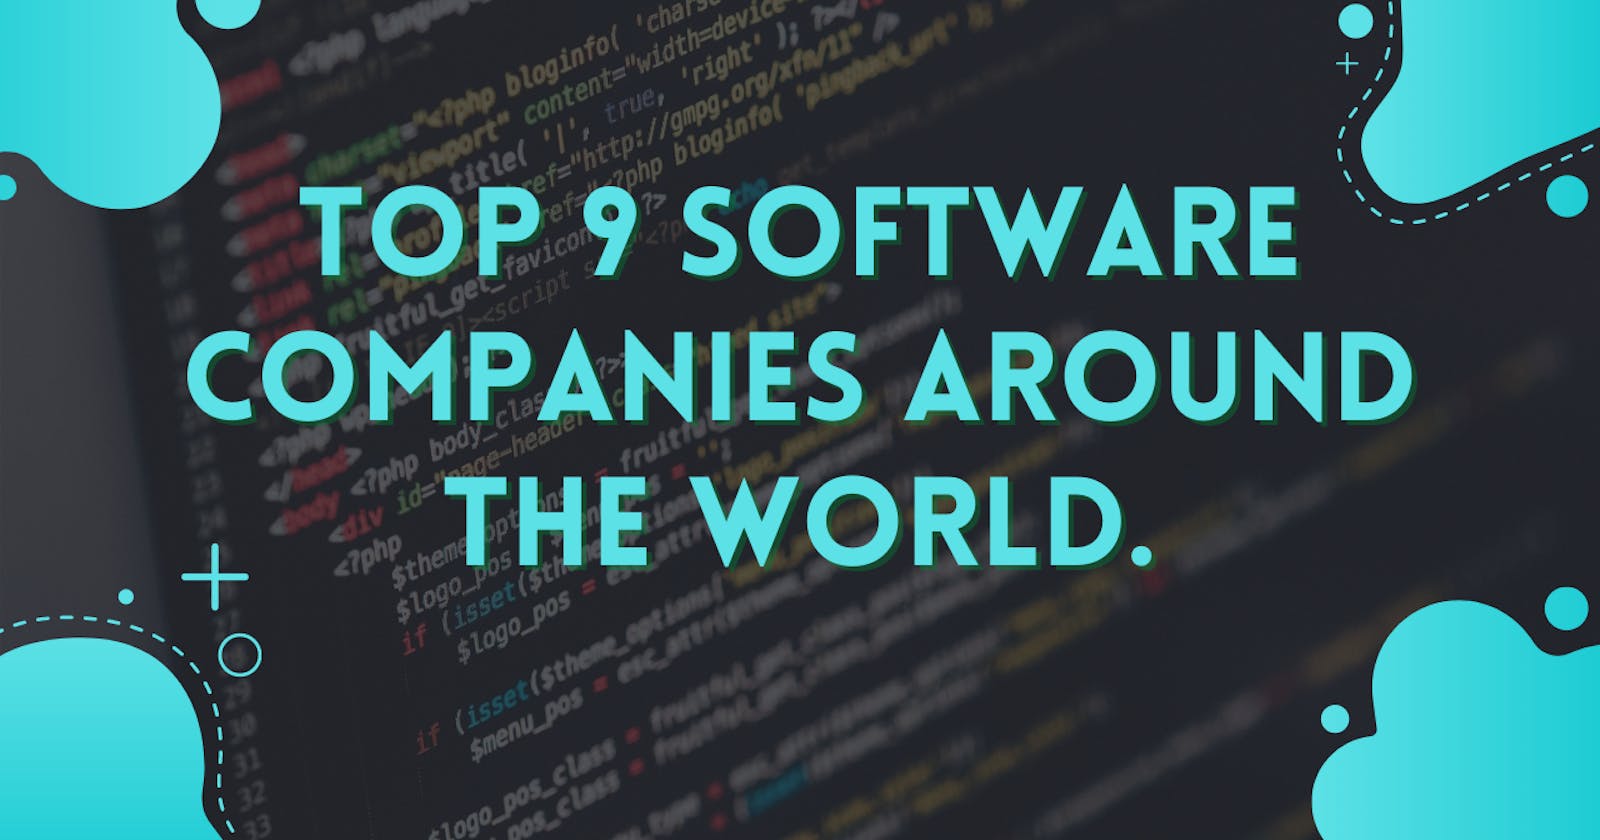 Top 9 Software Companies around the world.